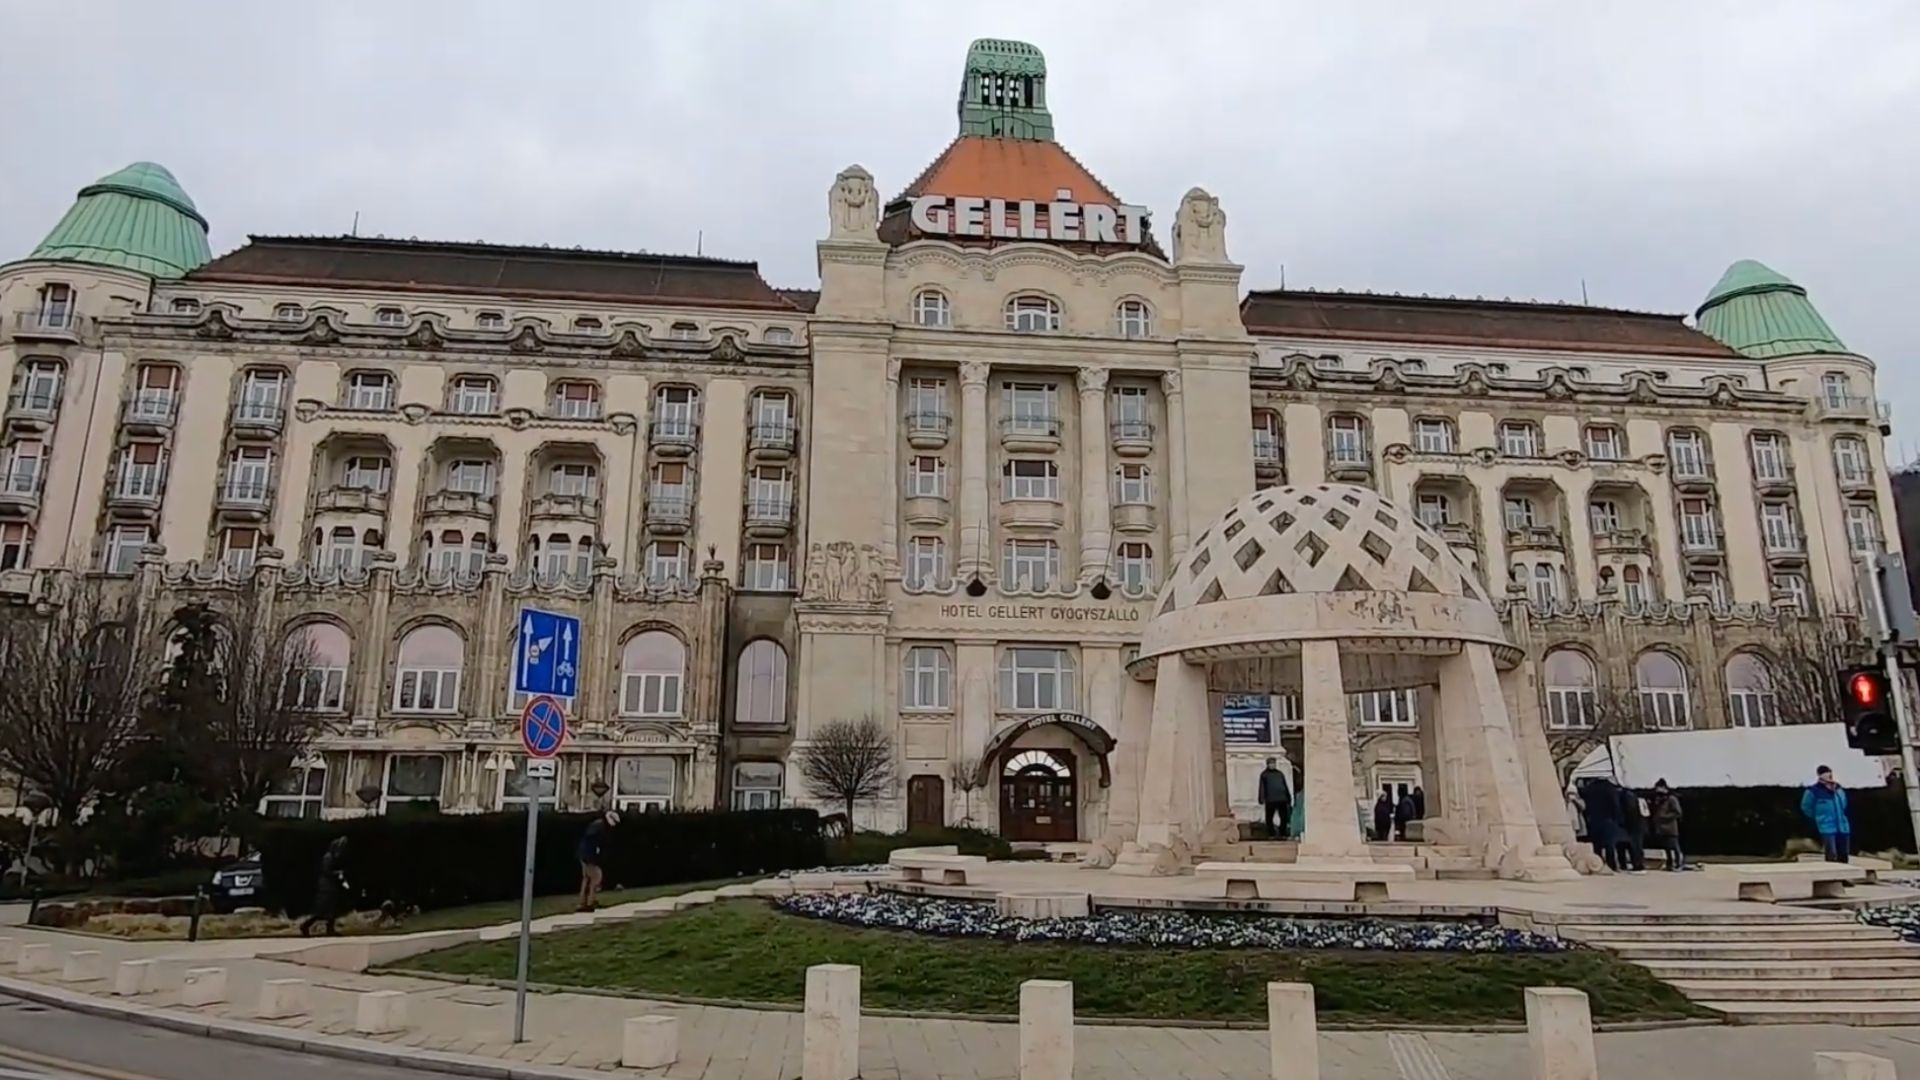 Front view of Gellért Thermal Bath and Hotel with its iconic architecture